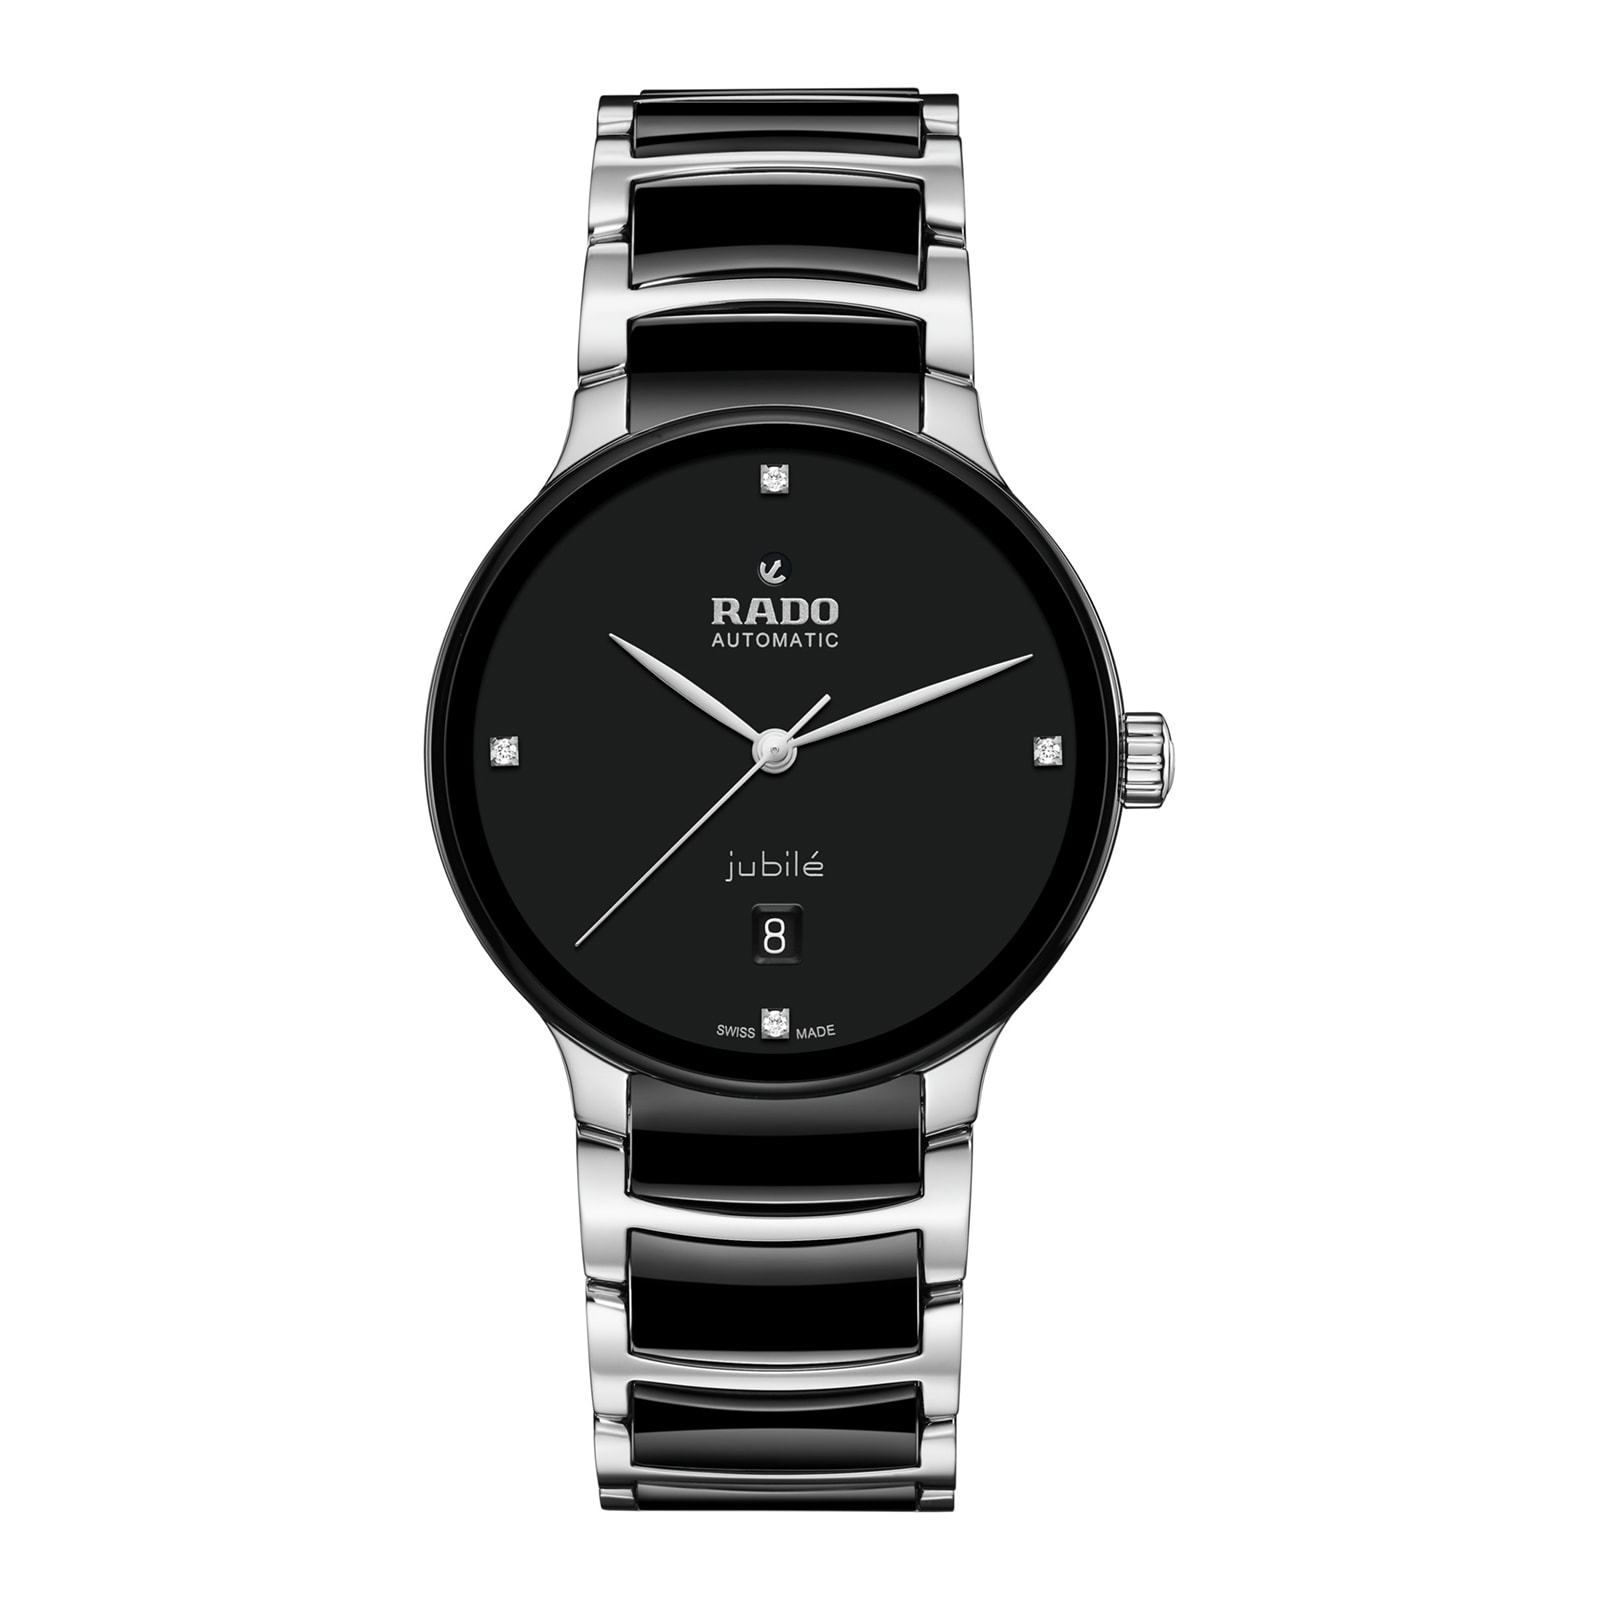 Rado Diastar for Rs.46,349 for sale from a Private Seller on Chrono24